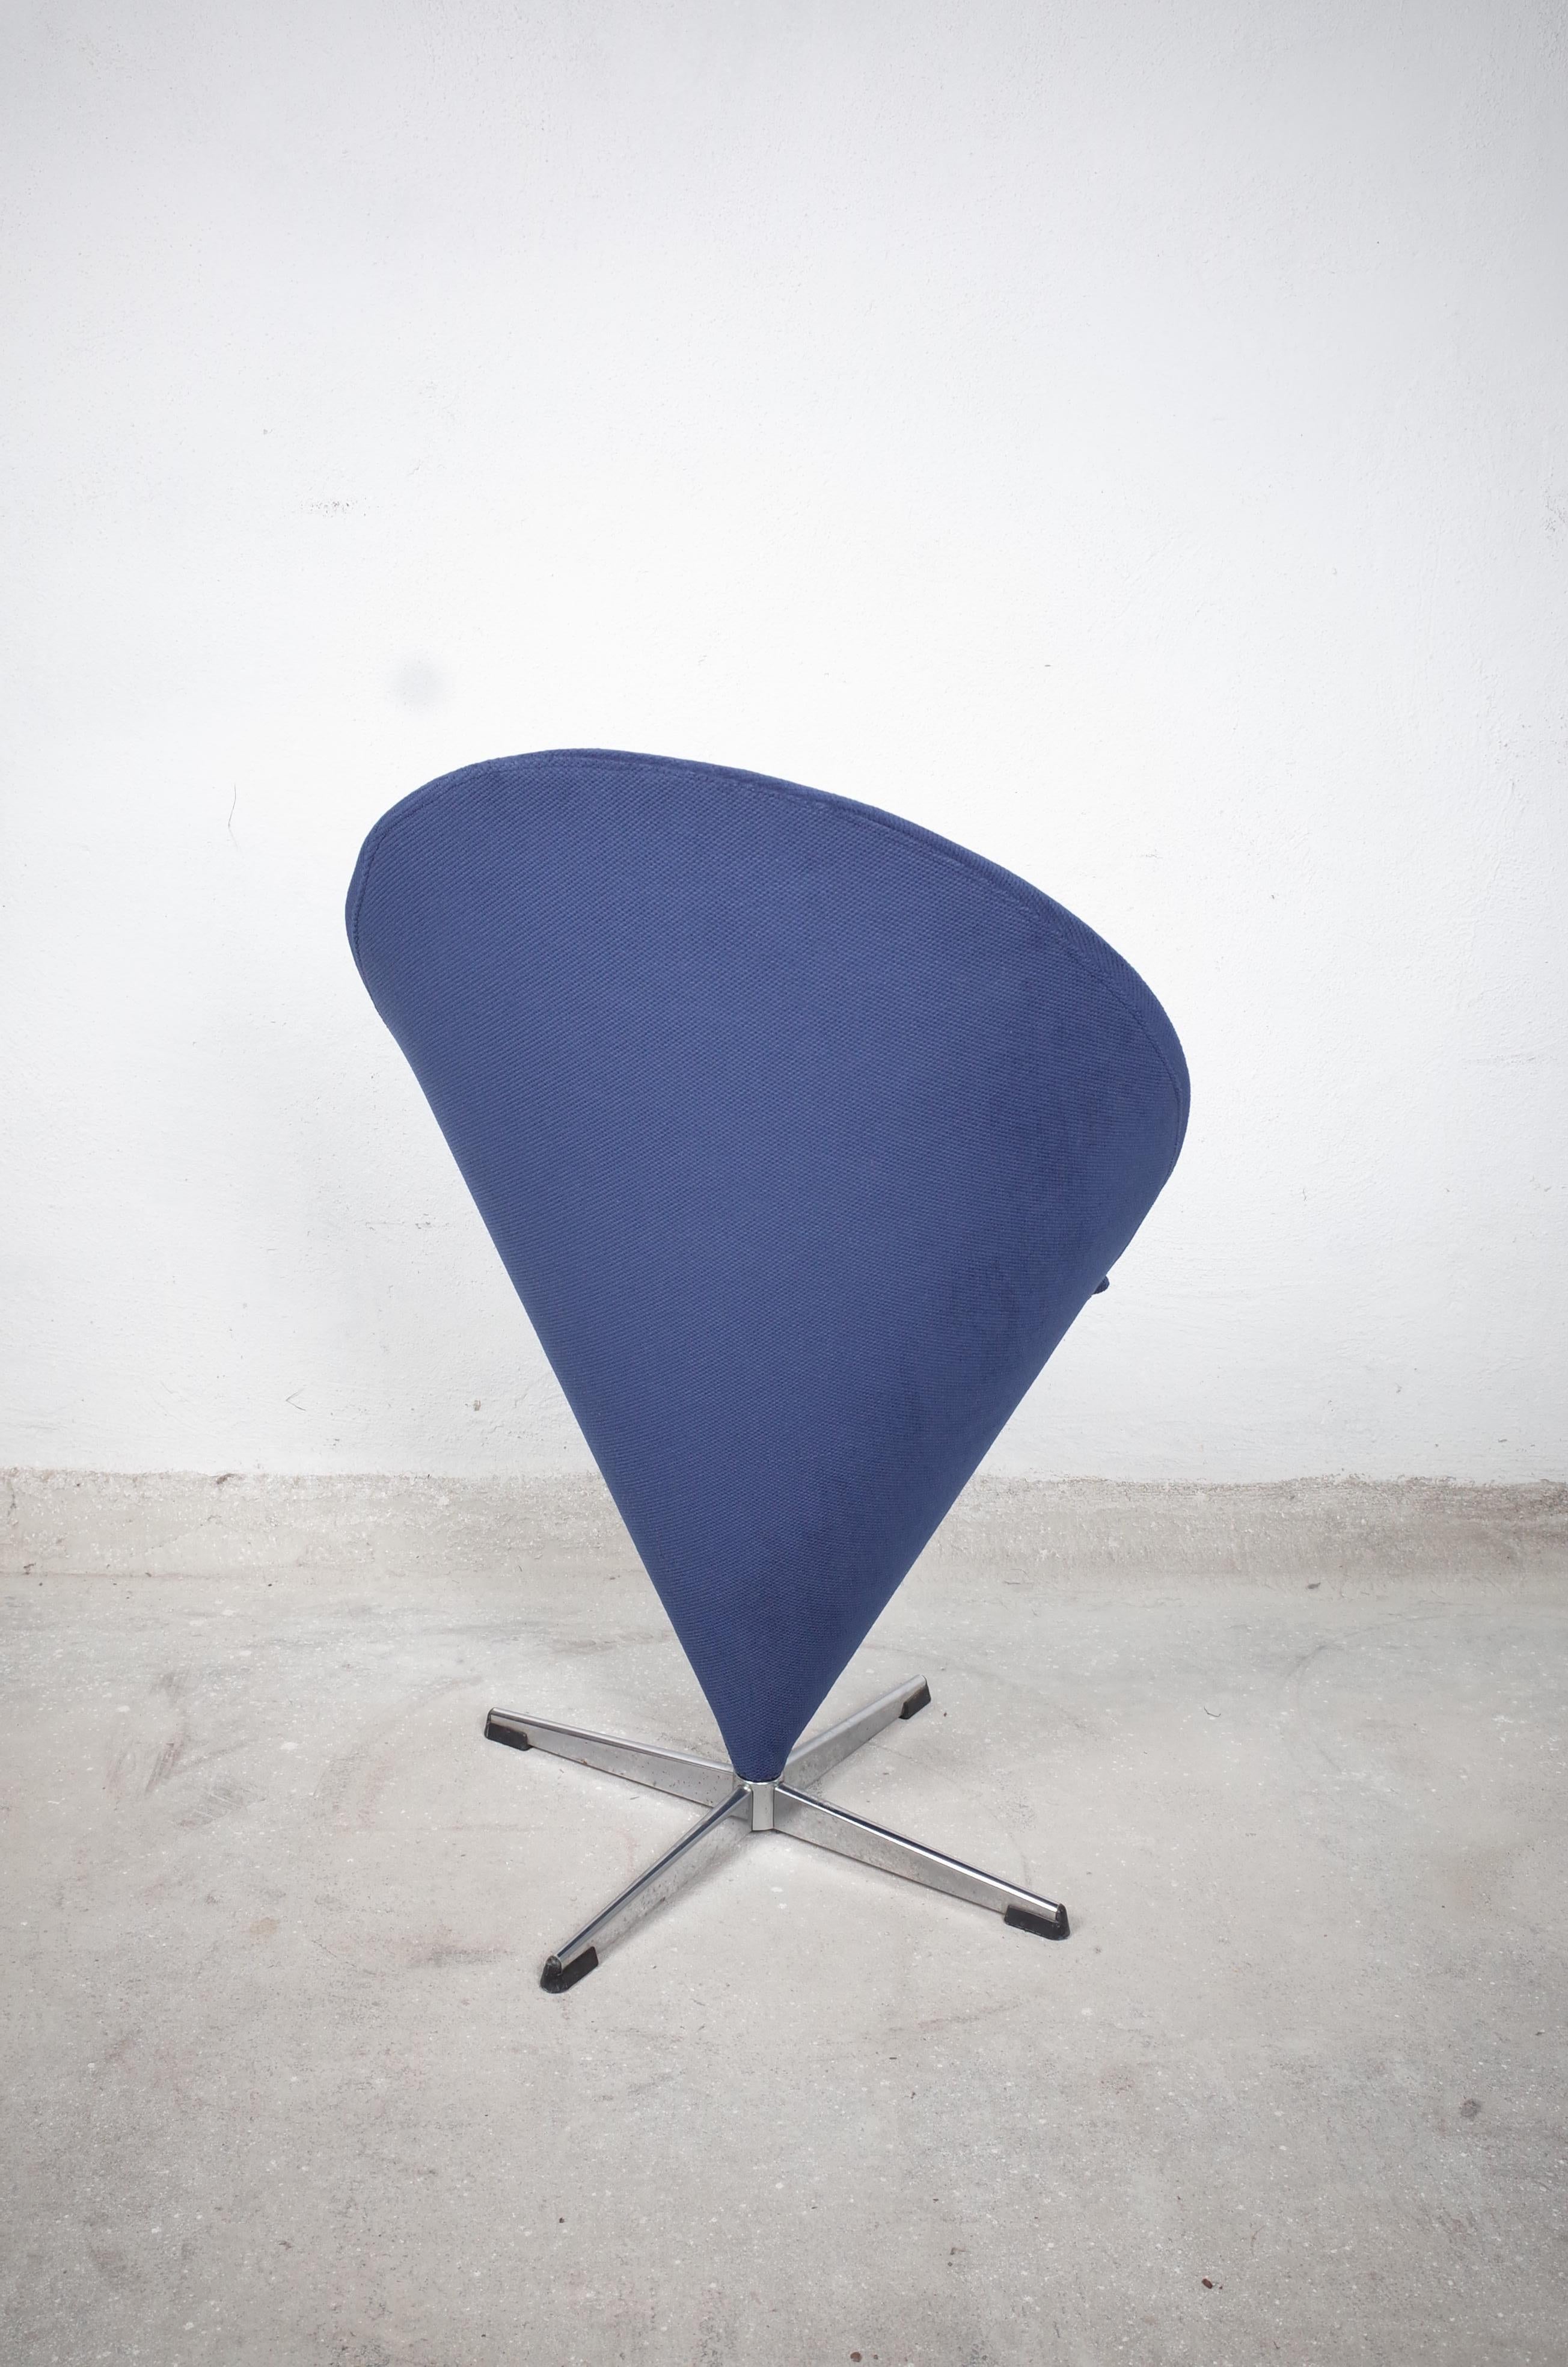 Midcentury Blue Cone Chair by Verner Panton, 1960s In Good Condition For Sale In Kumhausen, DE